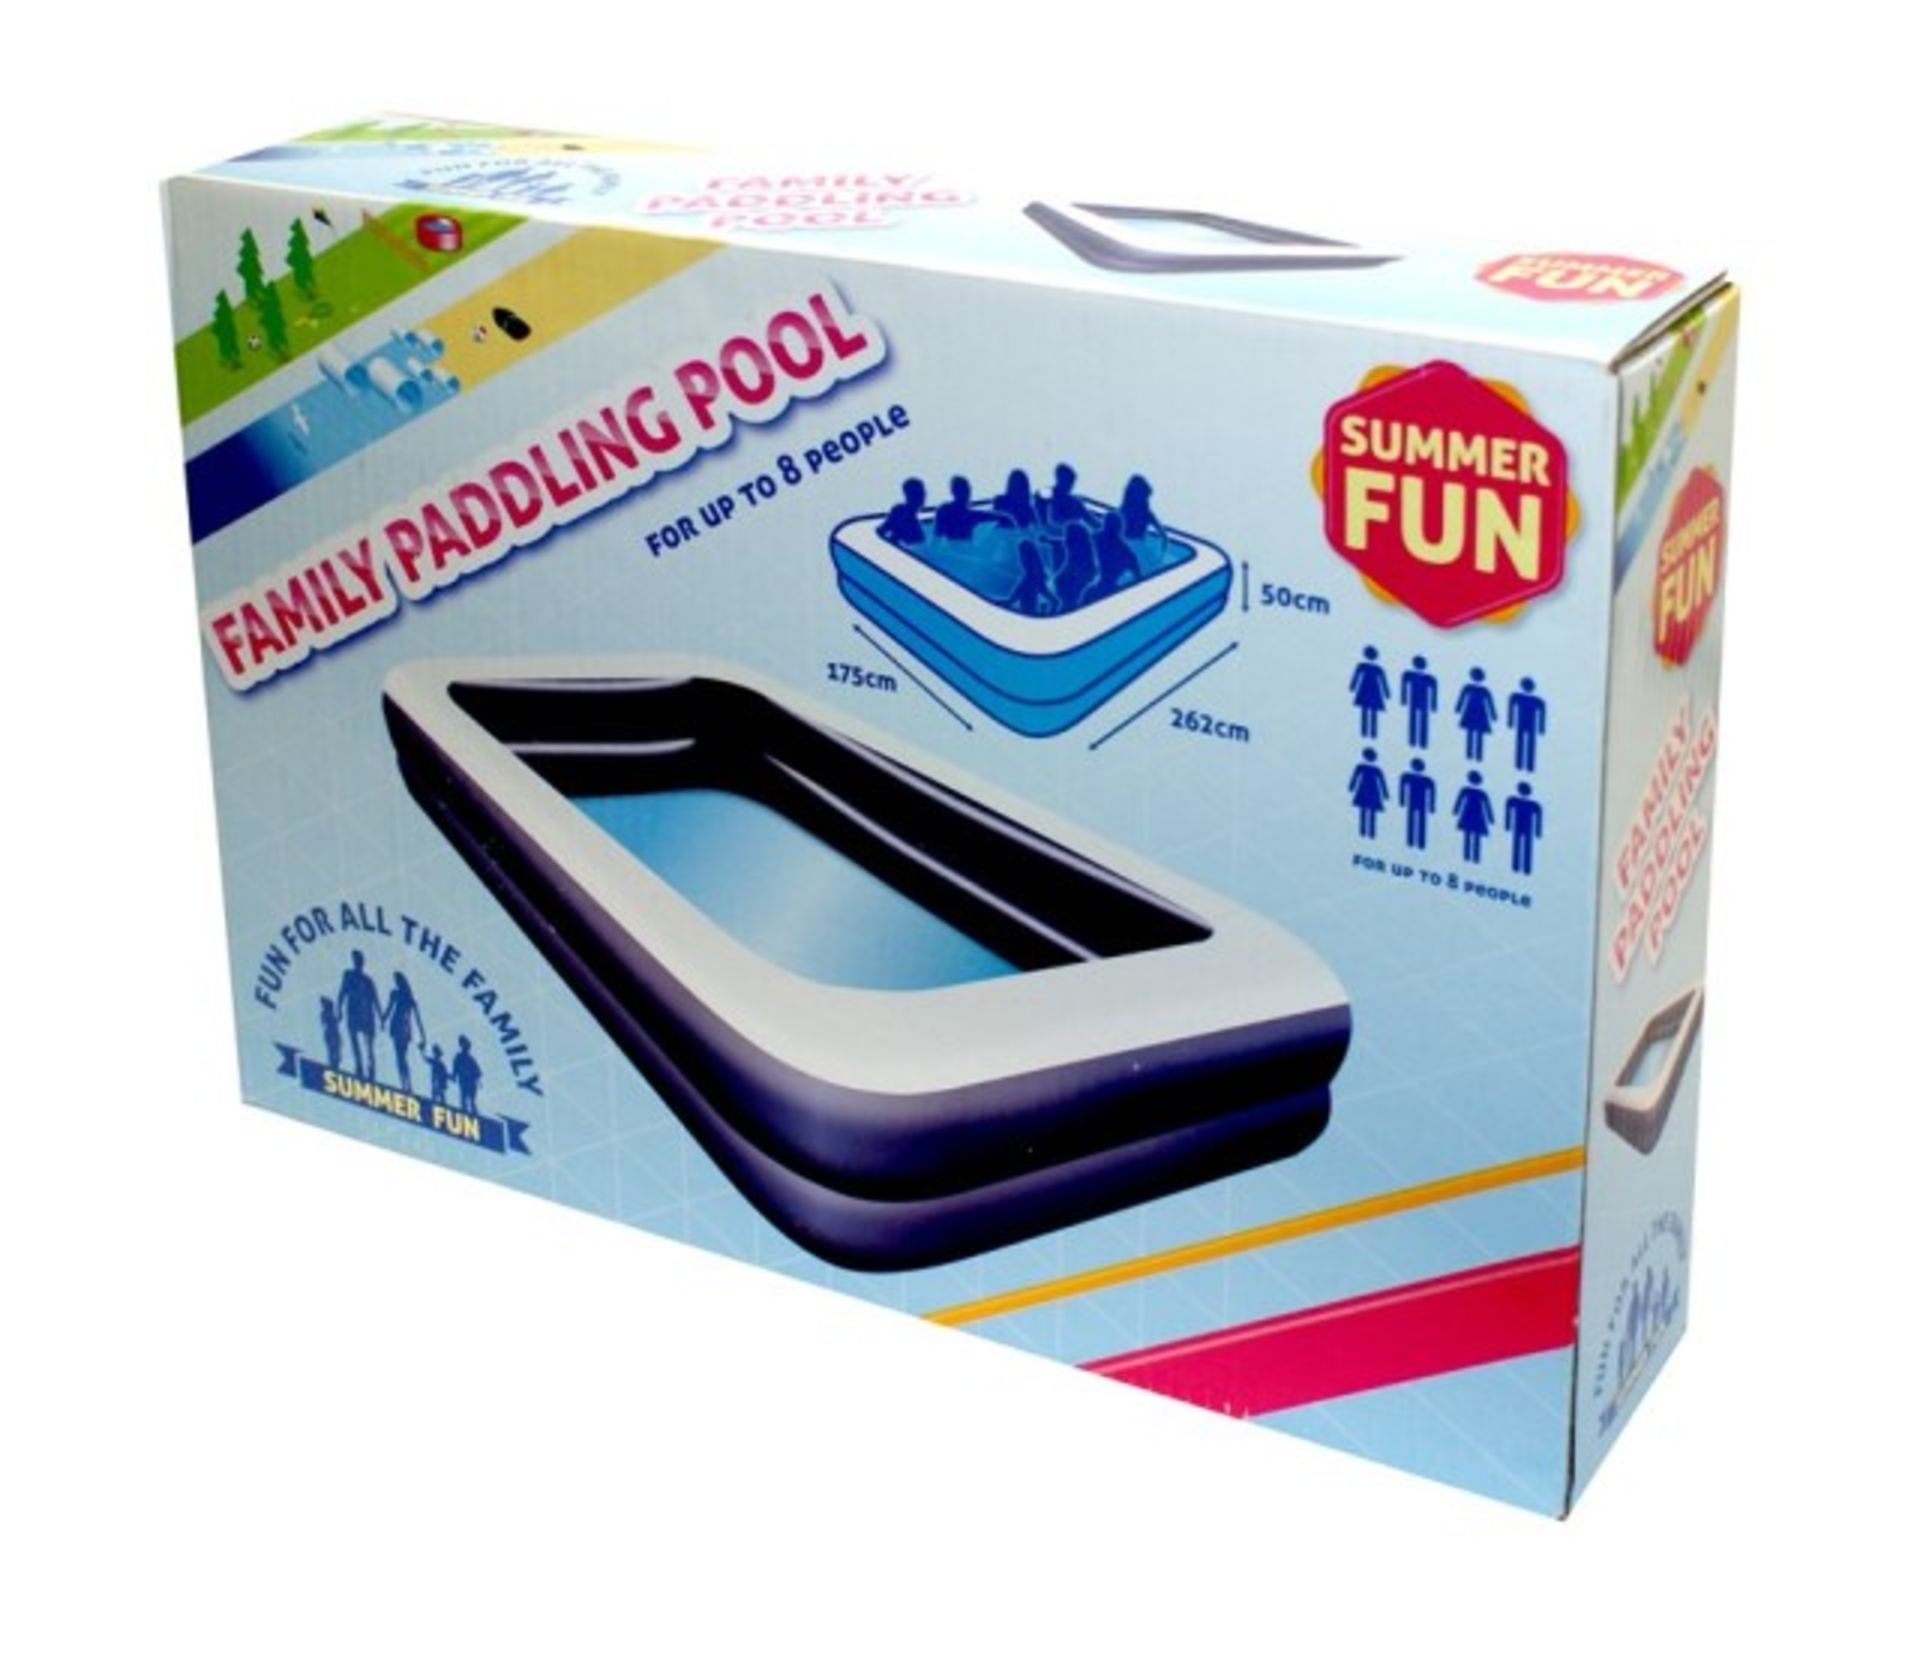 V Brand New Family Paddling Pool 175x262x50cm X 2 YOUR BID PRICE TO BE MULTIPLIED BY TWO - Image 2 of 2